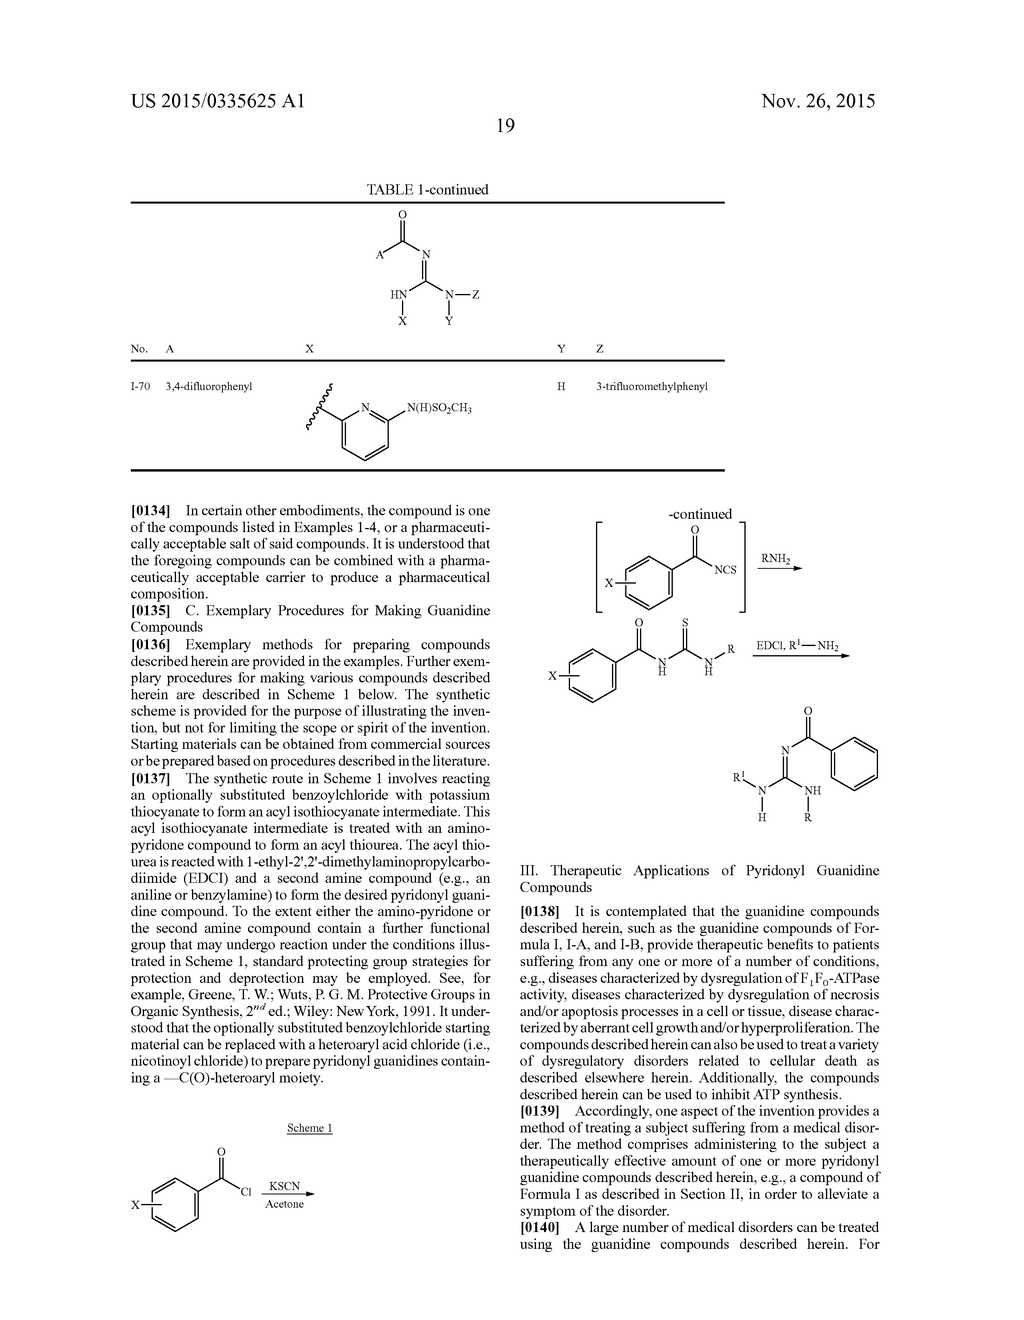 PYRIDONYL GUANIDINE F1F0-ATPASE INHIBITORS AND THERAPEUTIC USES THEREOF - diagram, schematic, and image 20